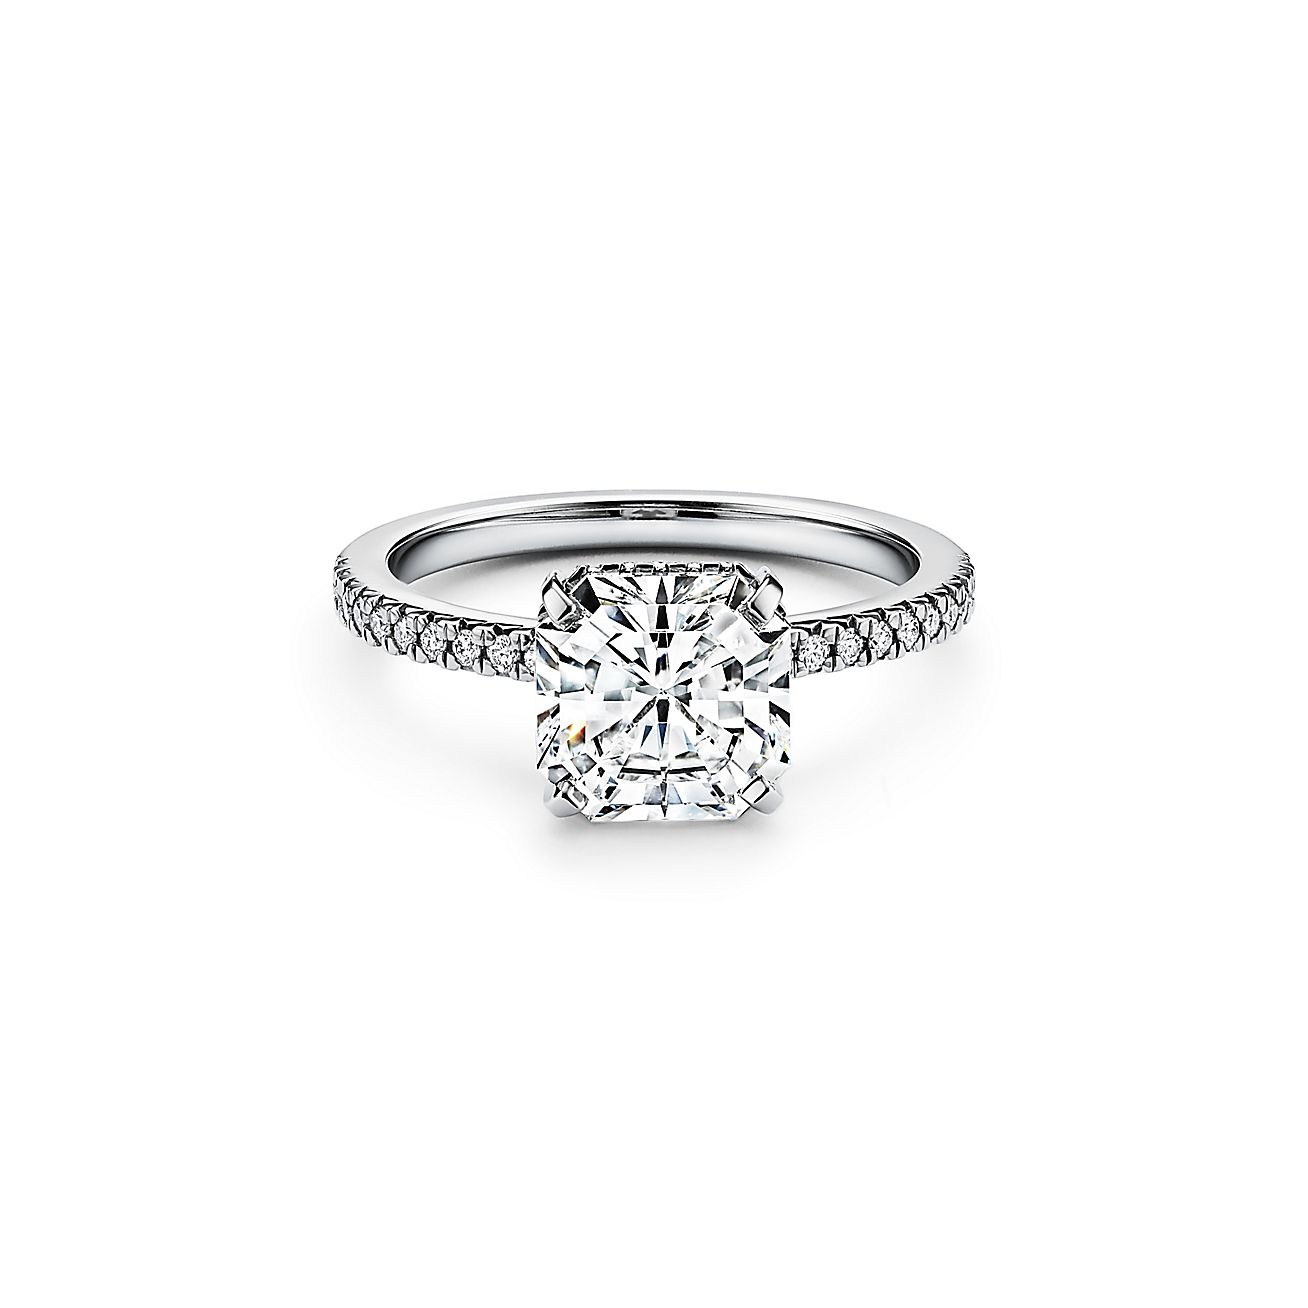 Tiffany True® engagement ring in platinum: an icon of modern love ...